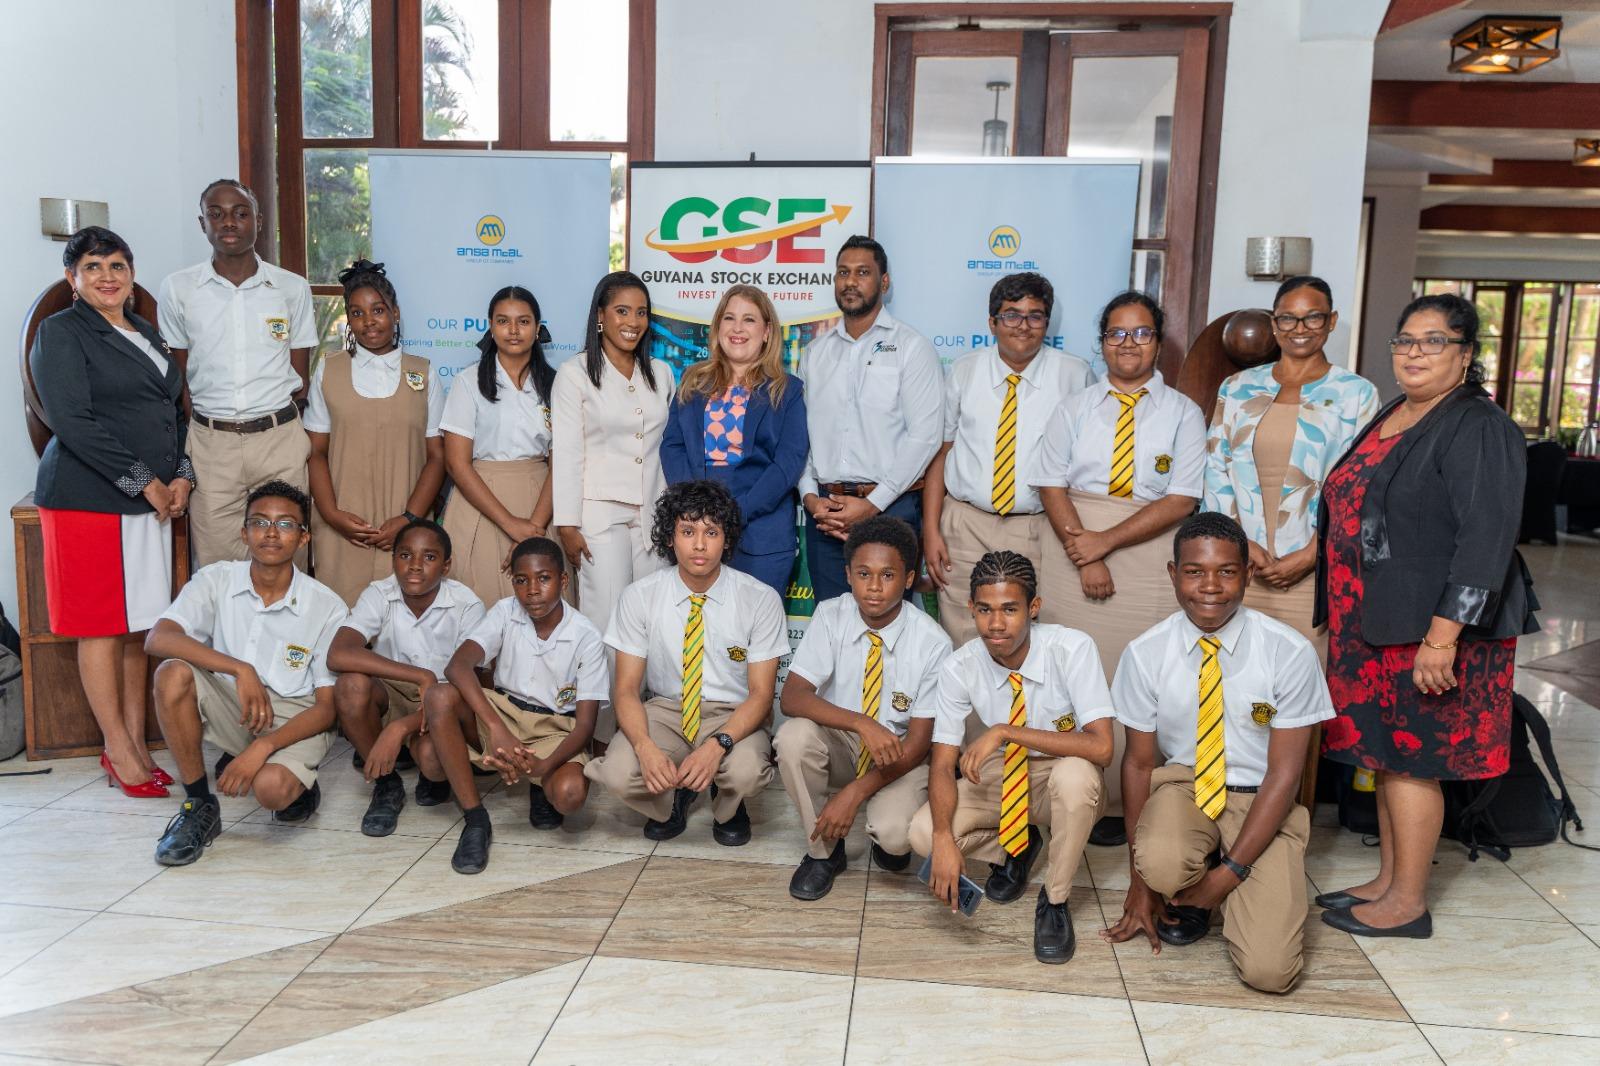 Students from Guyana and Trinidad & Tobago to benefit from partnership between Ansa Mcal and WIZDOMCRM Caribbean - Kaieteur News